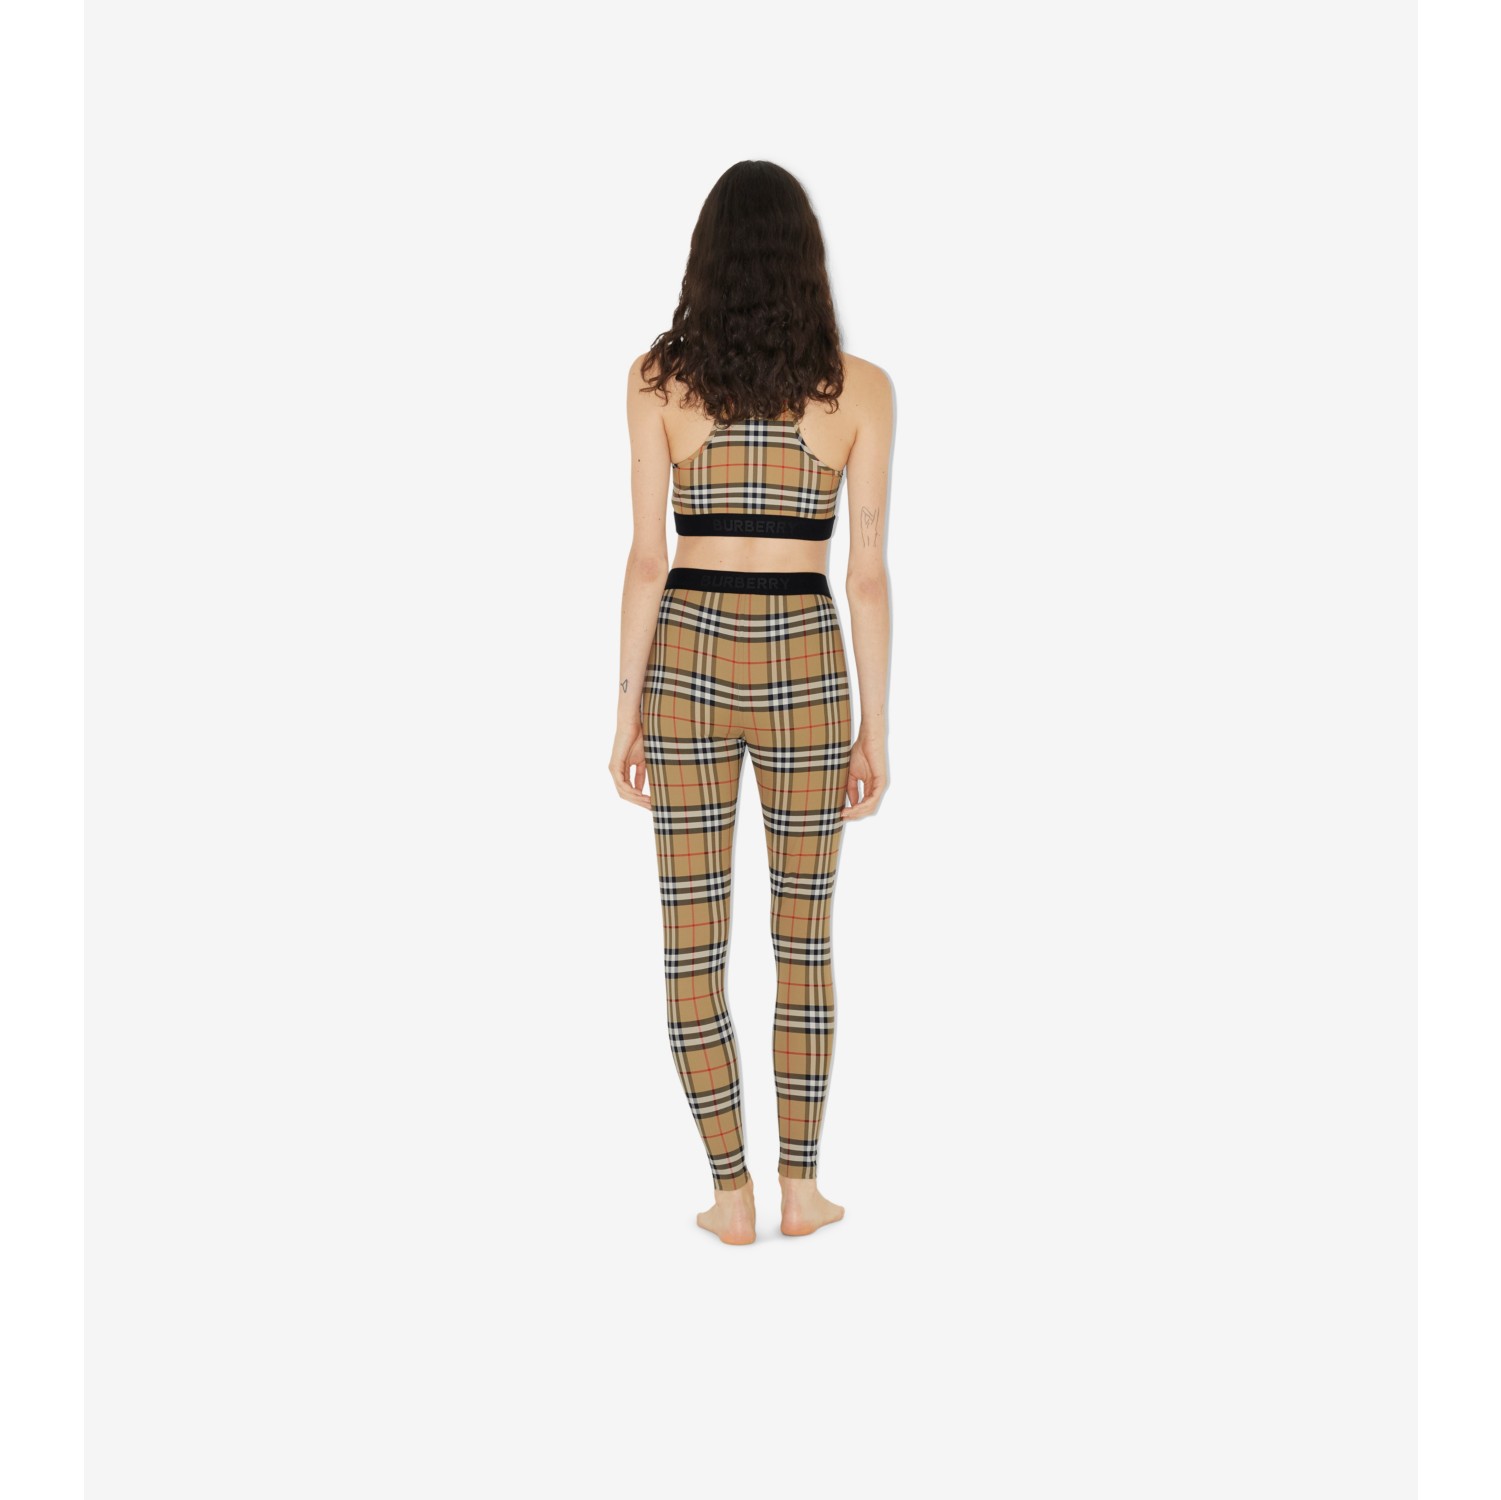 Belvoir Checked Stretch Leggings Burberry Bottoms Pants Yellow